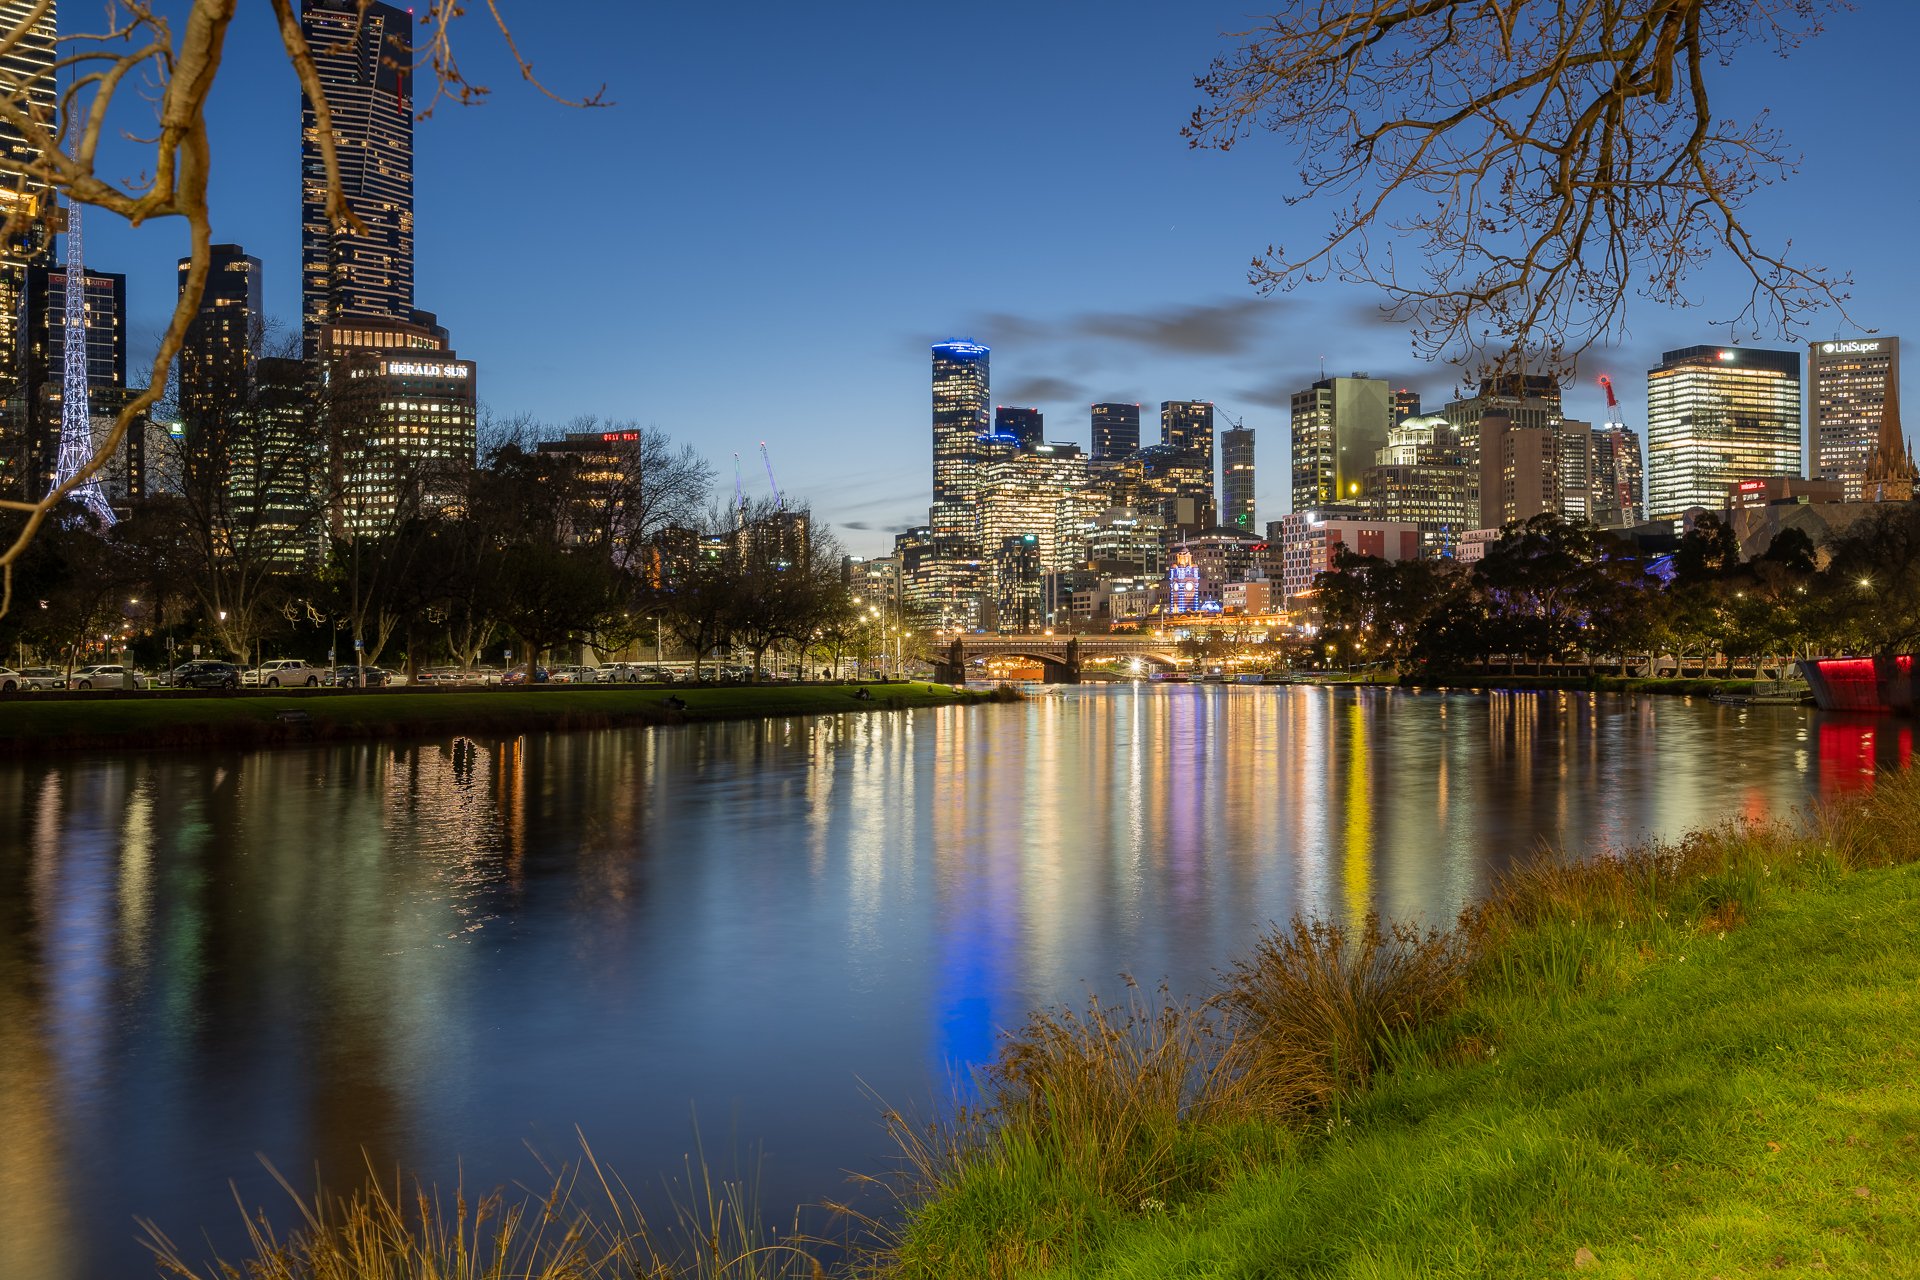 The city of Melbourne in Australia at night